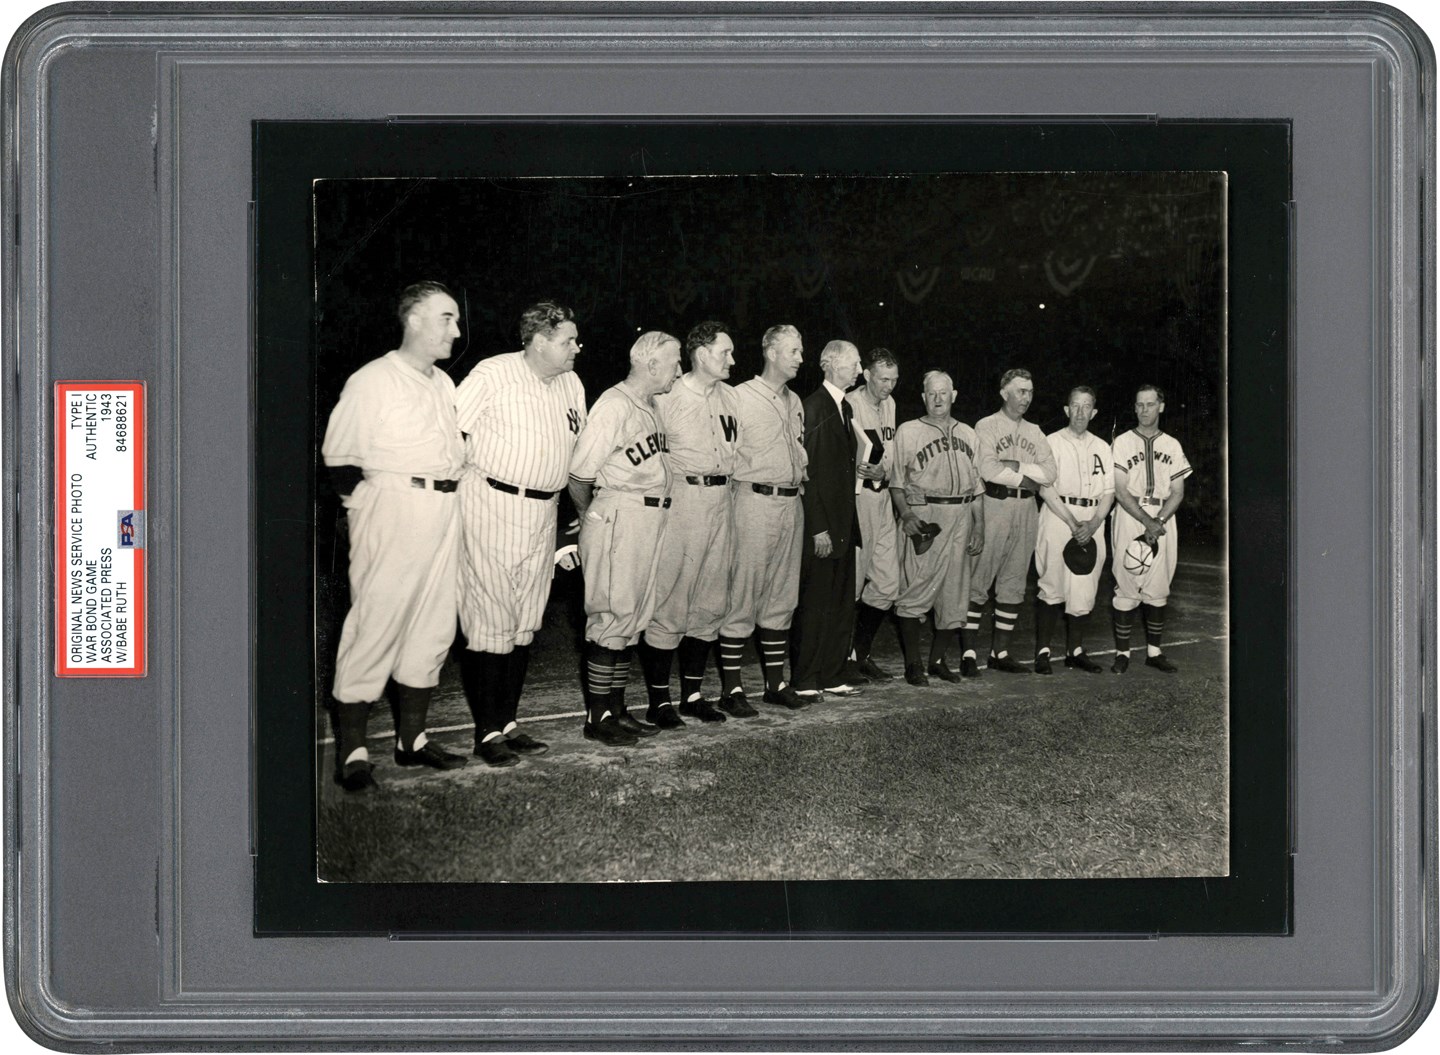 - 1943 War Bond Game Photograph with Babe Ruth, Honus Wagner & Legendary Hall of Famers (PSA Type I)